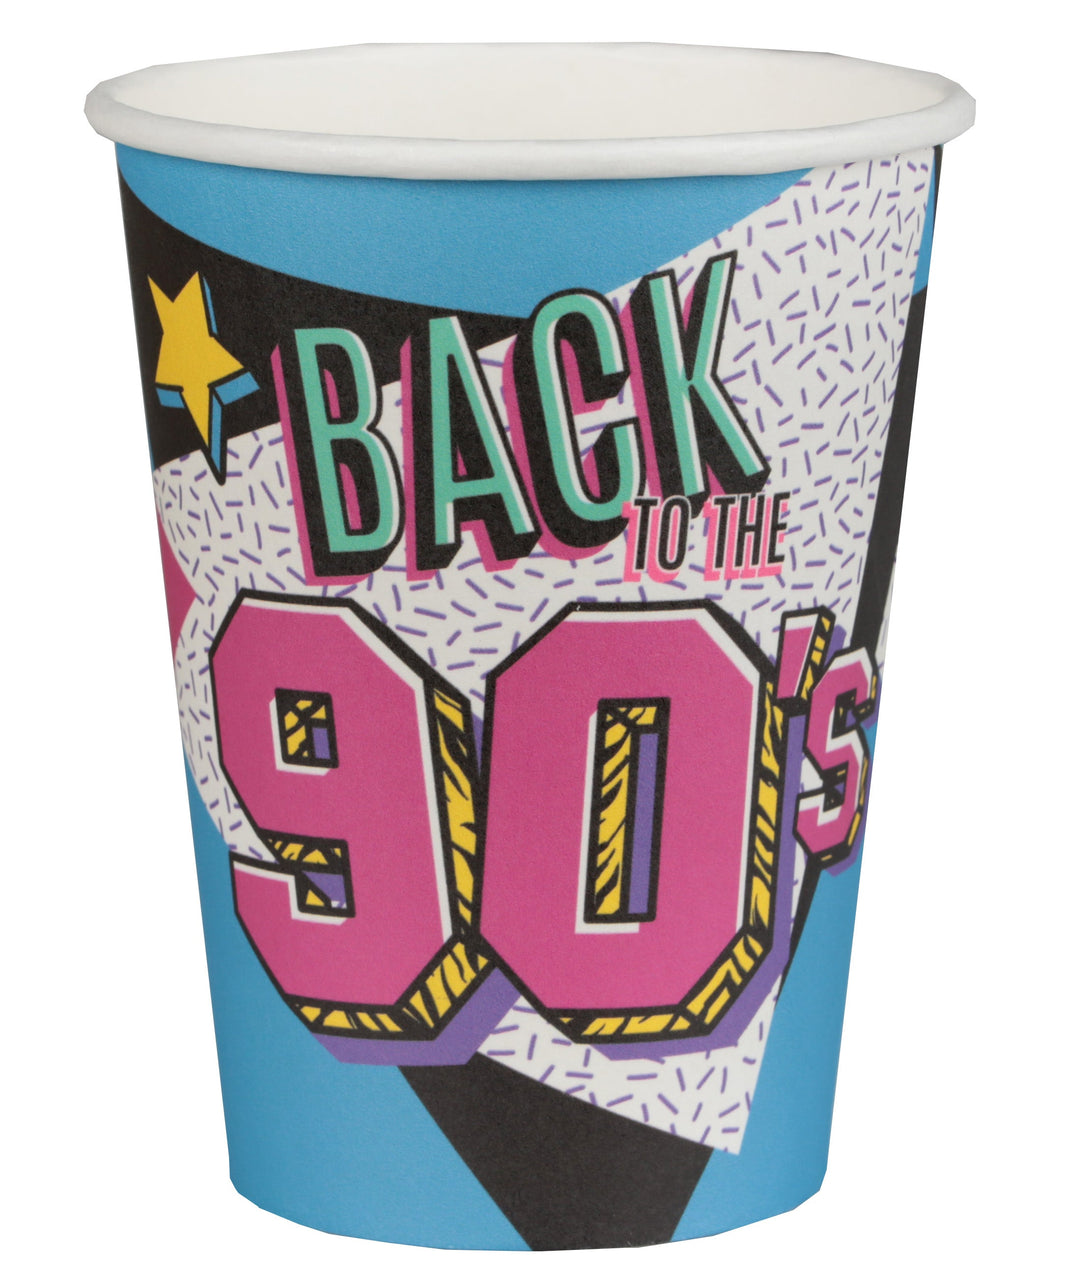 Retro '90s Themed Party Paper Cups: Trendy, Elegant, Perfect for Fun Birthday Celebrations